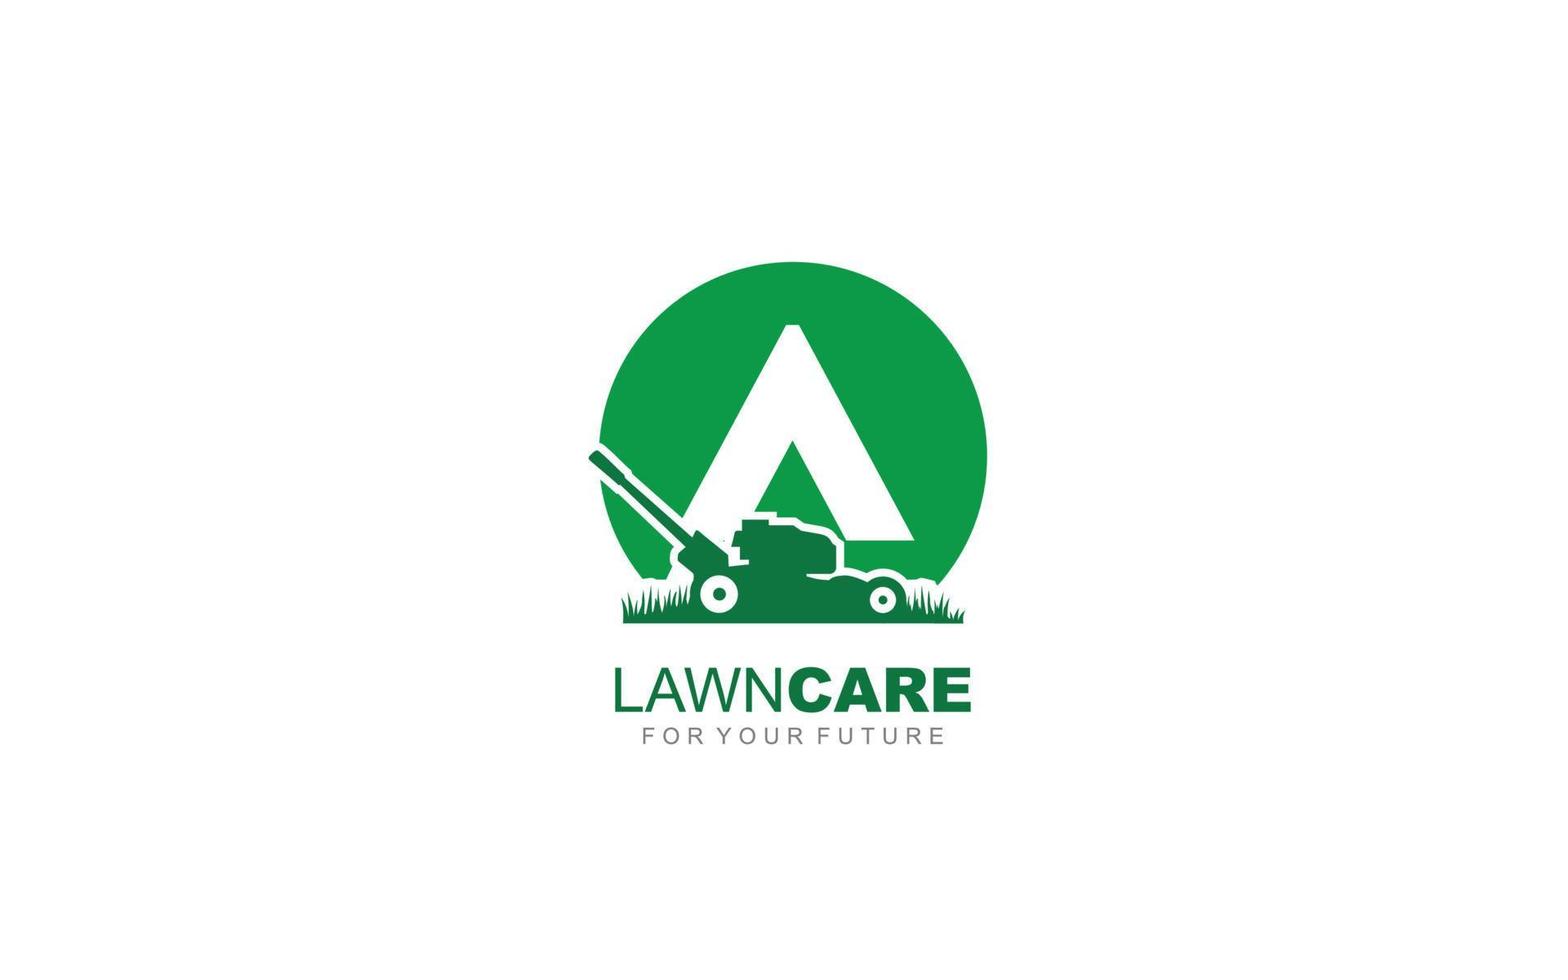 A logo lawncare for branding company. mower template vector illustration for your brand.